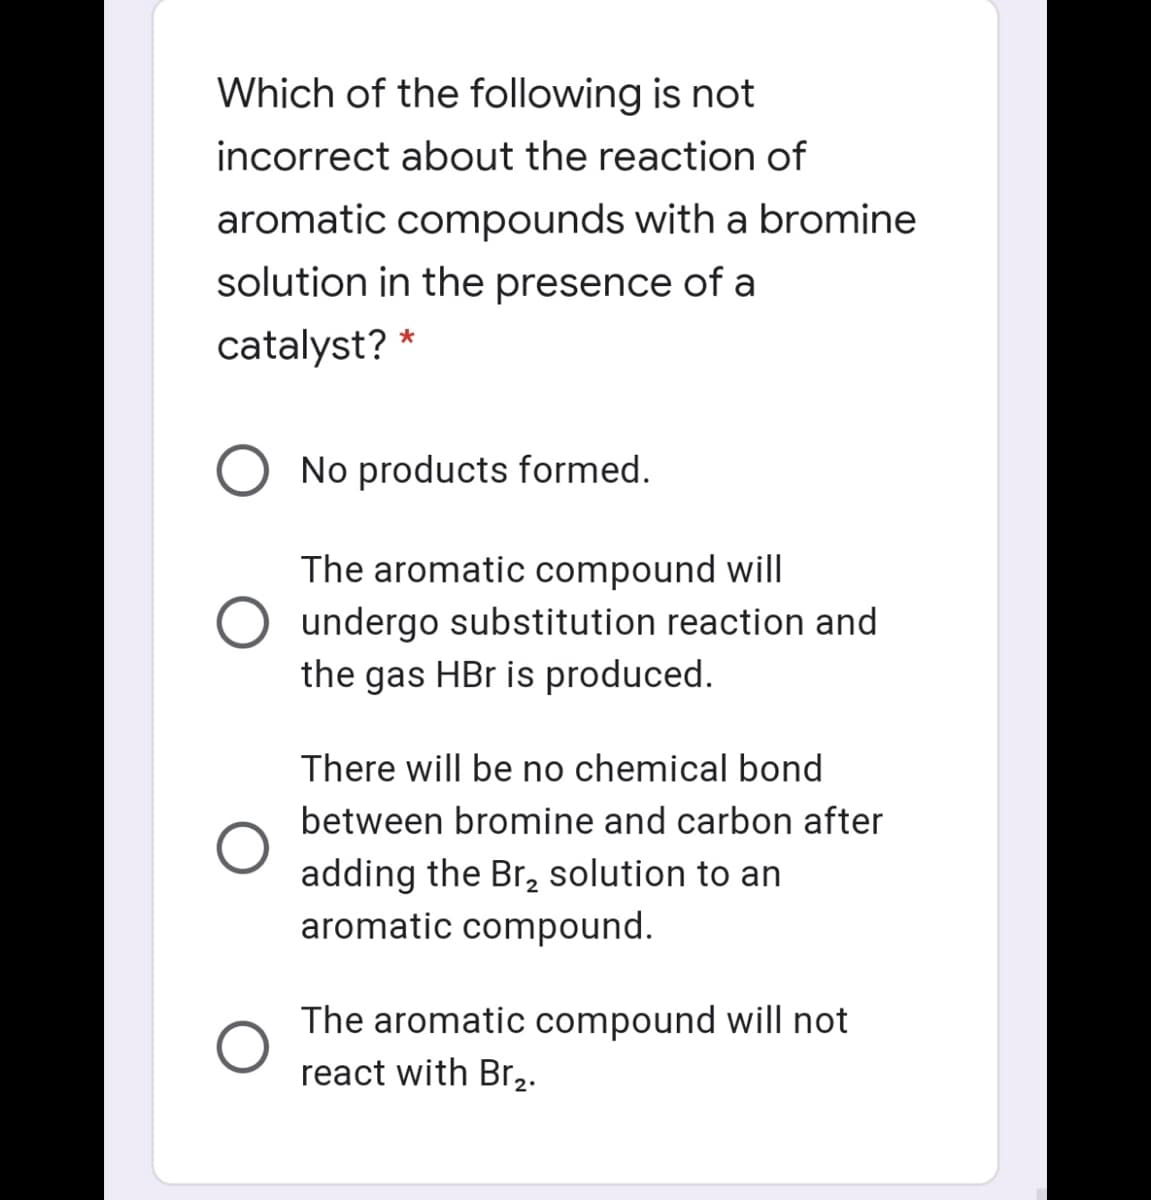 Which of the following is not
incorrect about the reaction of
aromatic compounds with a bromine
solution in the presence of a
catalyst? *
No products formed.
The aromatic compound will
undergo substitution reaction and
the gas HBr is produced.
There will be no chemical bond
between bromine and carbon after
adding the Br, solution to an
aromatic compound.
The aromatic compound will not
react with Br,.
